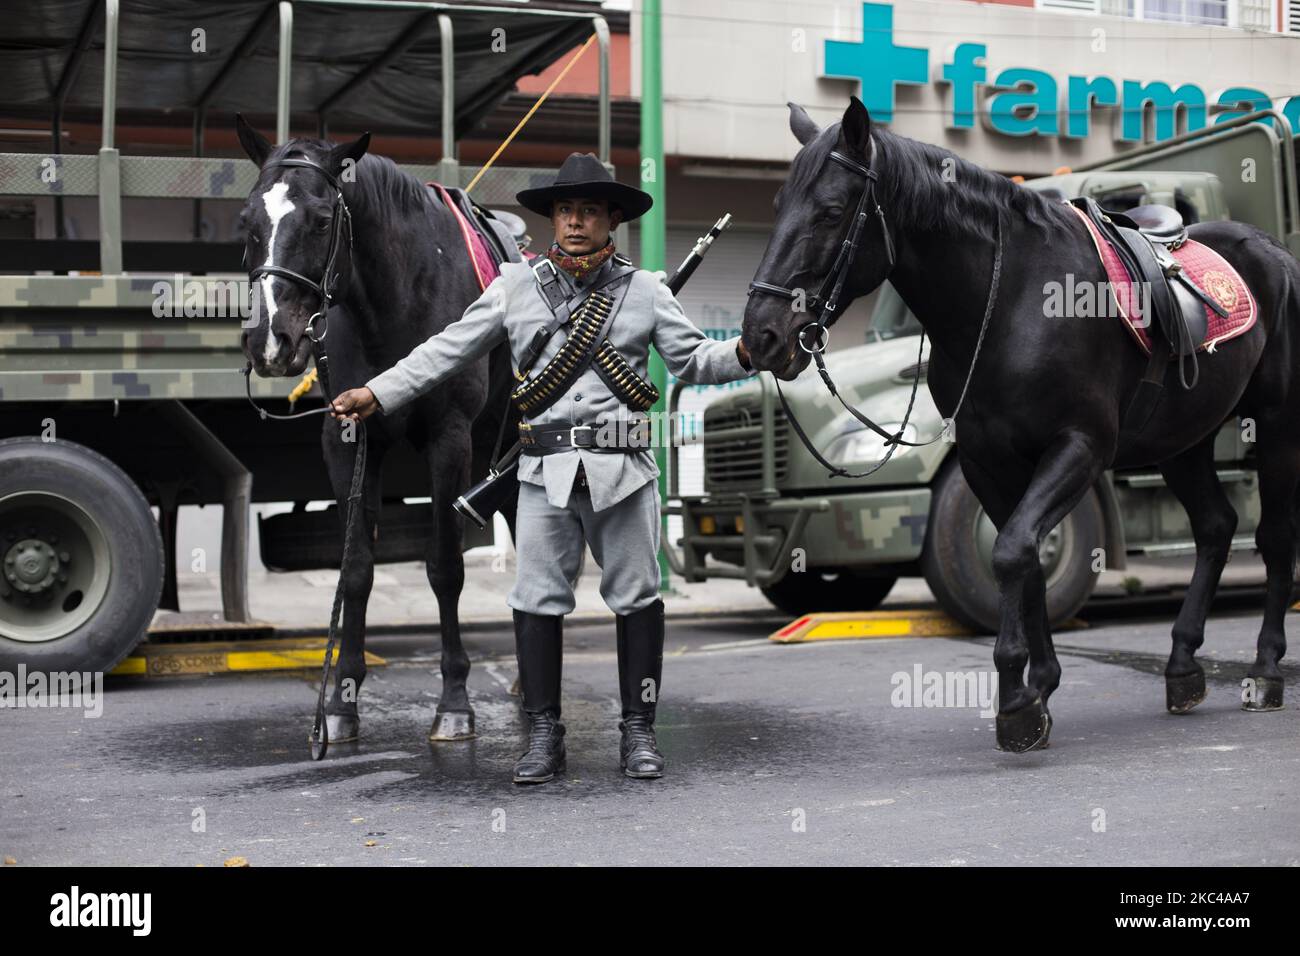 Actresses and actors disguised as characters from the Mexican Revolution, wearing protective masks due the Covid-19 pandemic, commemorate the 110th anniversary of Mexican Revolution, on November 20, 2020 in Mexico City, Mexico. (Photo by Cristian Leyva/NurPhoto) Stock Photo